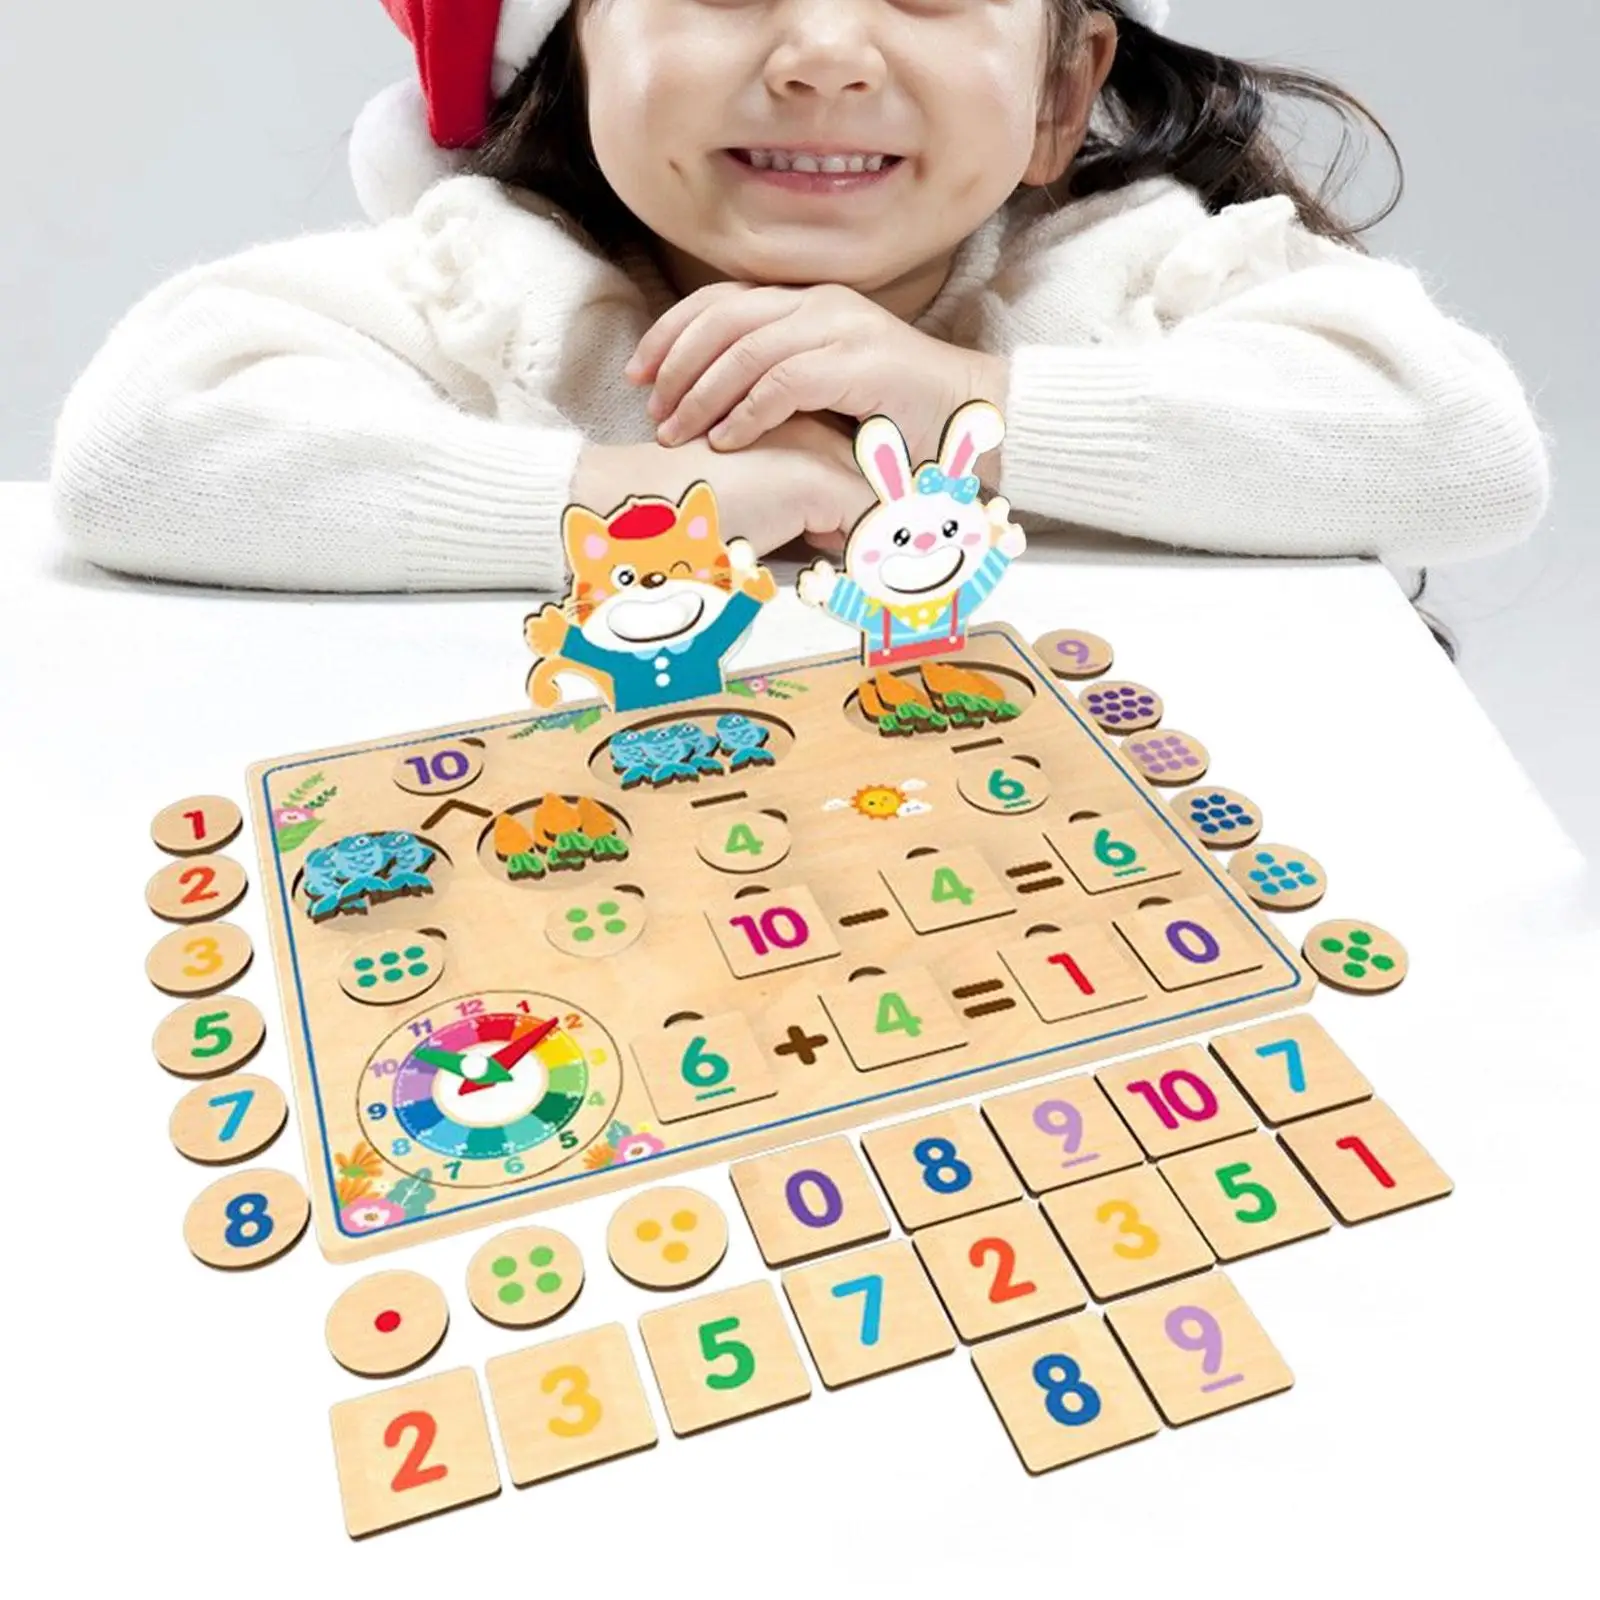 Wood Mathematical Learning Toy Addition and Subtraction Board Fine Workmanship Festival Gift Sturdy Professional Counting